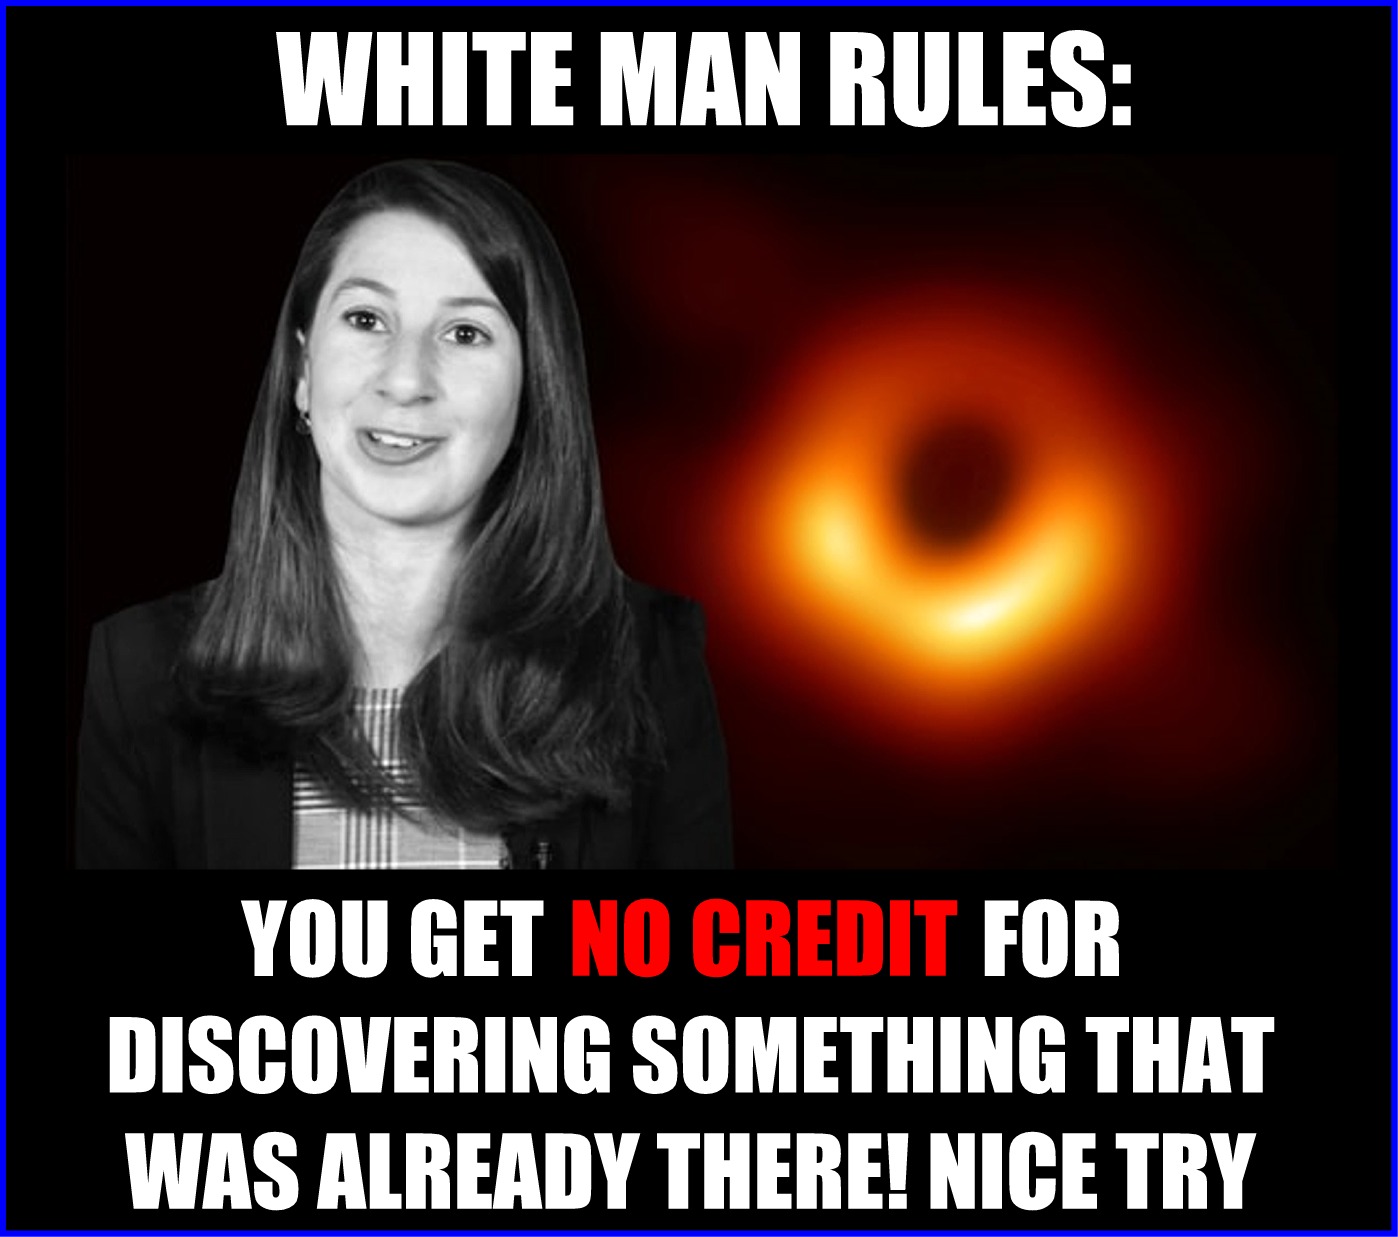 Conservative memes - pilatus - White Man Rules You Get No Credit For Discovering Something That Was Already There! Nice Try